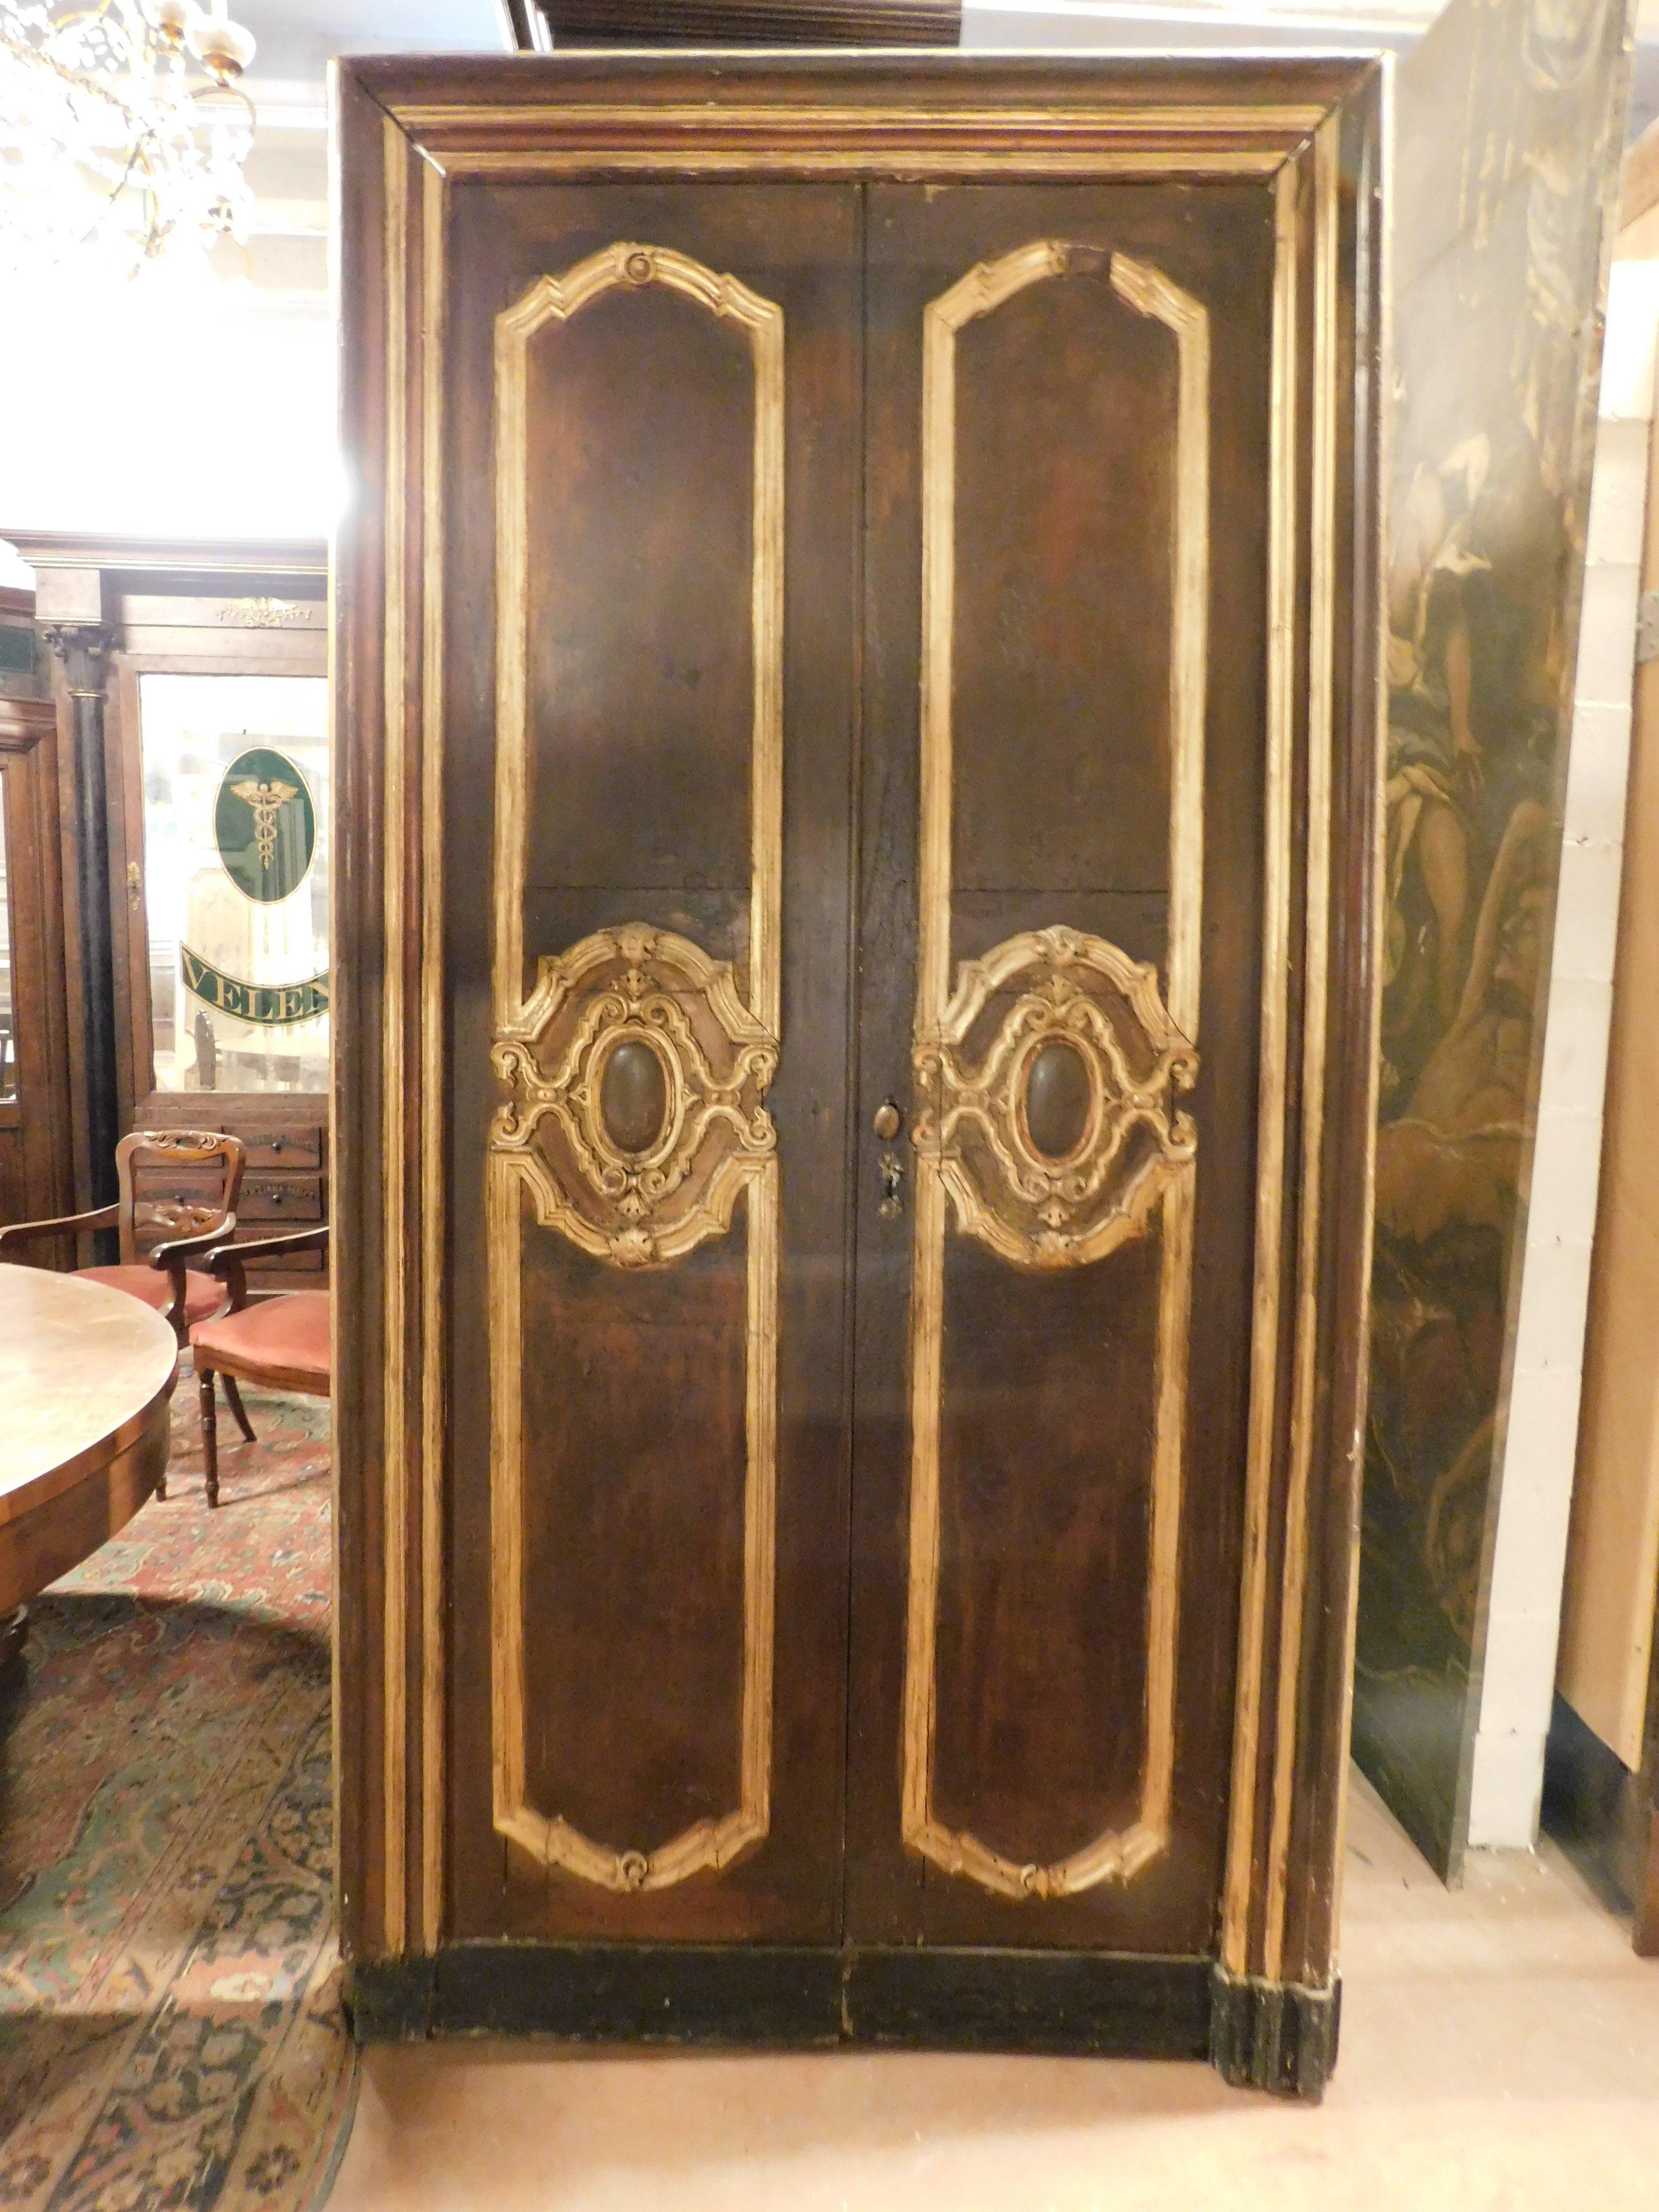 set of 2 double-wing interior doors, with original and golden frames, hand lacquered in brown and gold colours, built in Italy in the late 18th century.
Sculpted back but perhaps to be finished with another colour, beautiful in pairs to furnish a